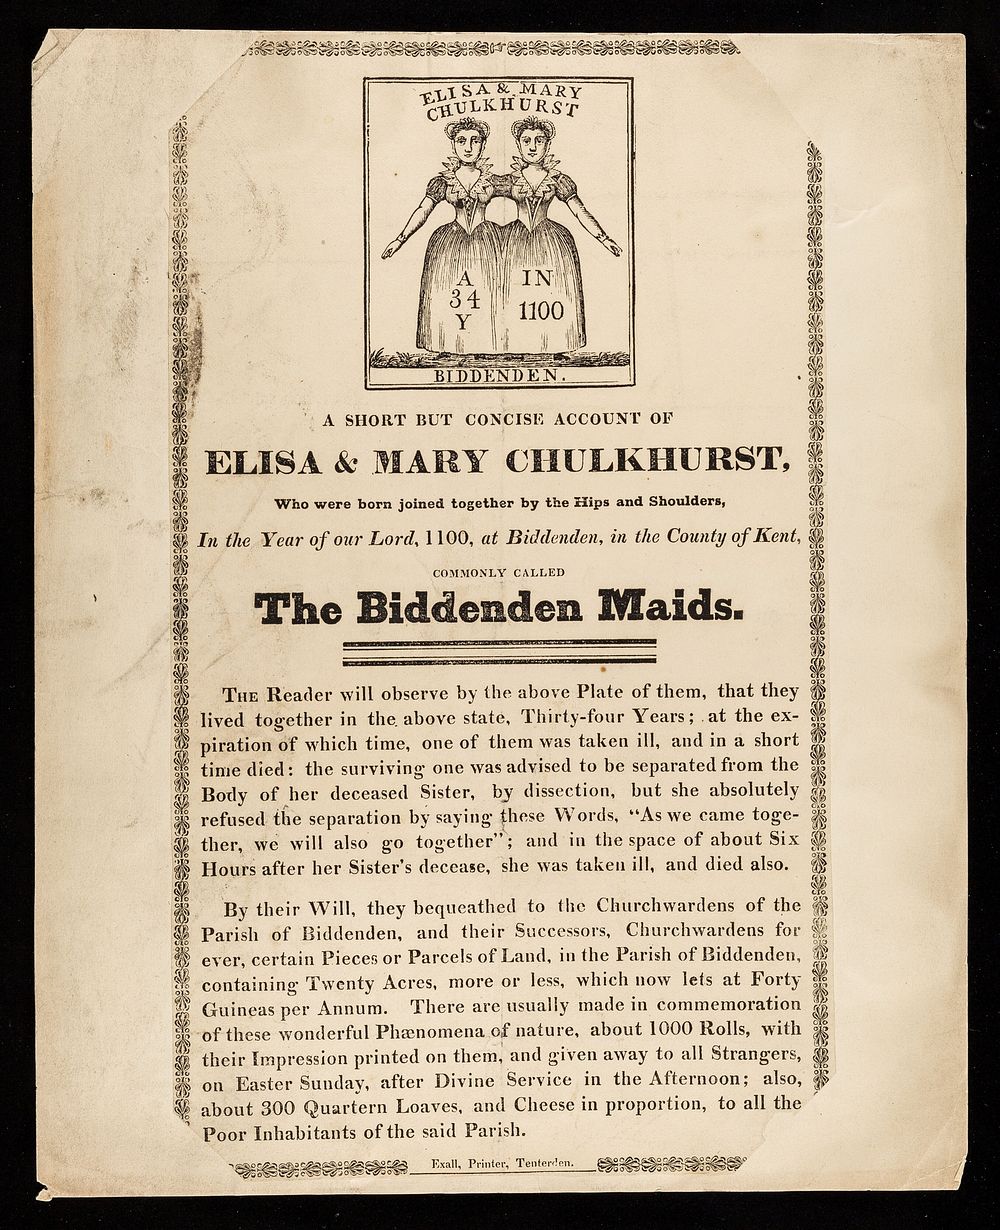 A short but concise account of Elisa & Mary Chulkhurst, who were born joined together by the hips and shoulders, in the year…